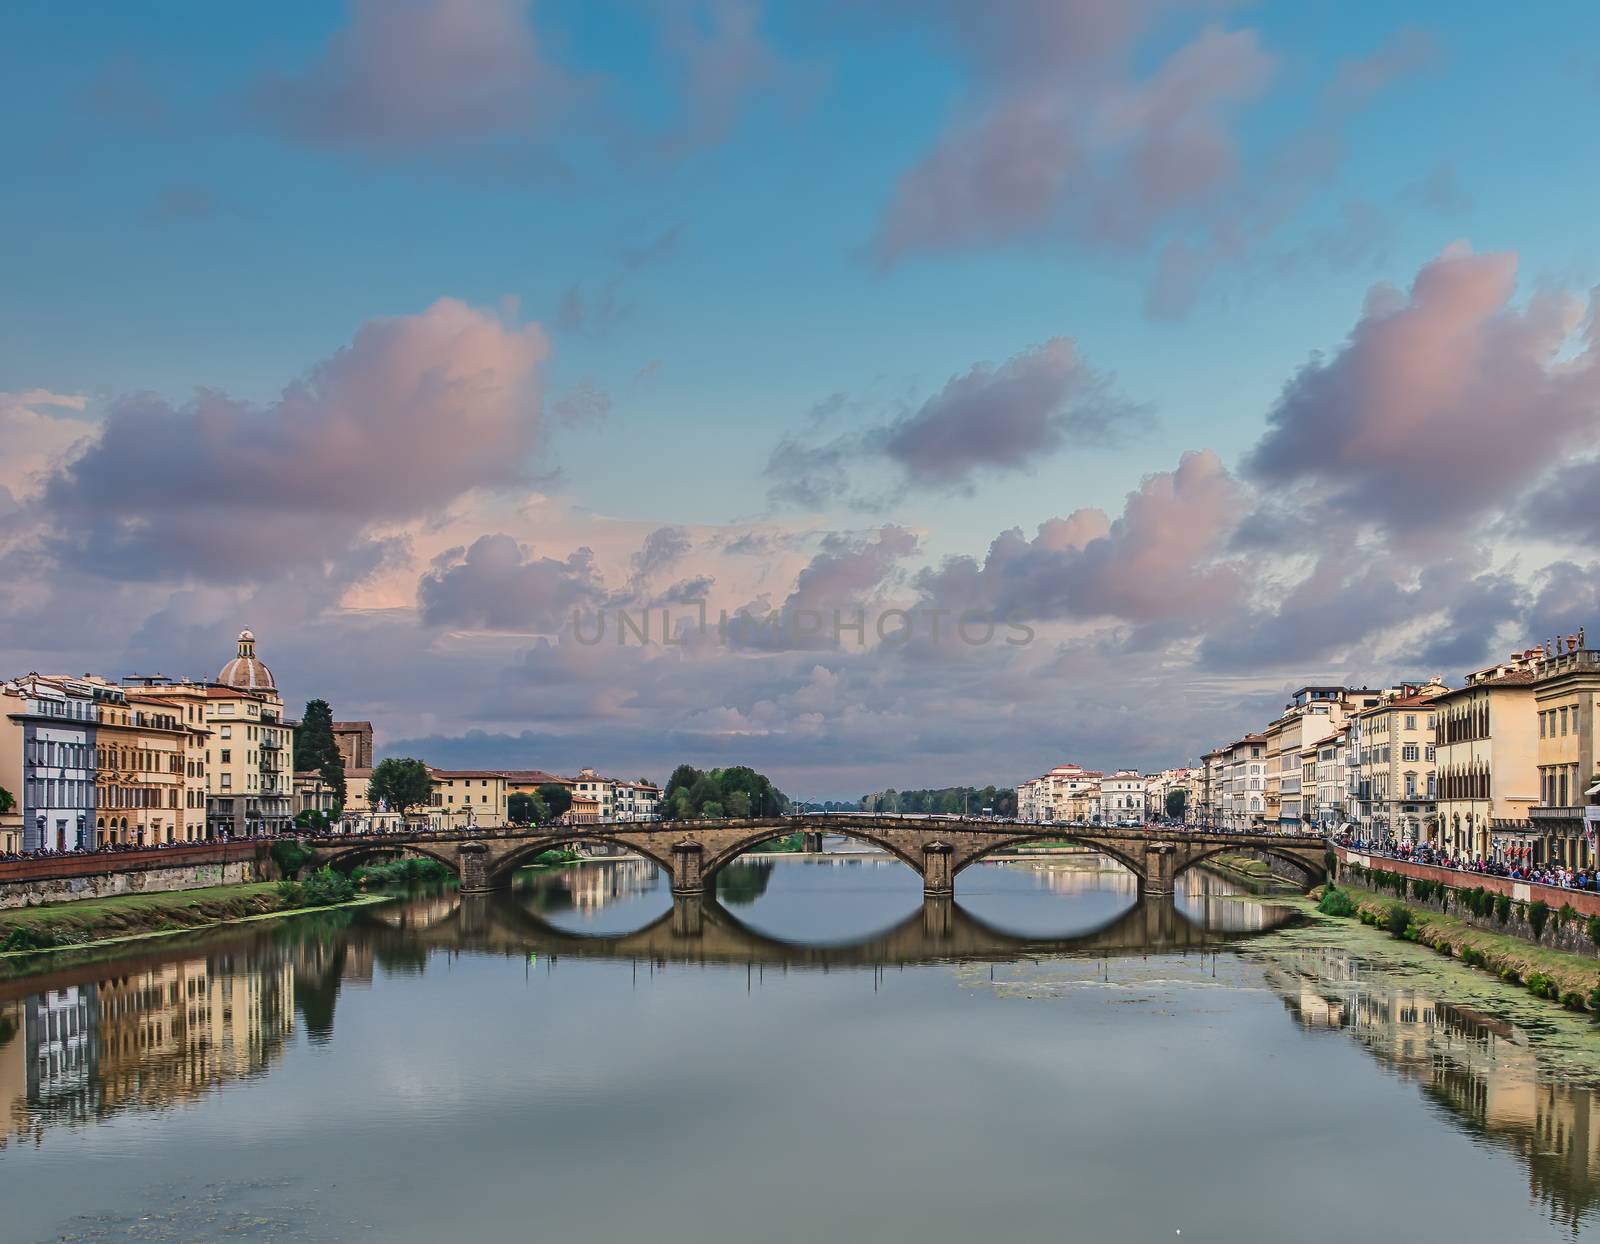 Old Bridge Over the Arno River in Florence